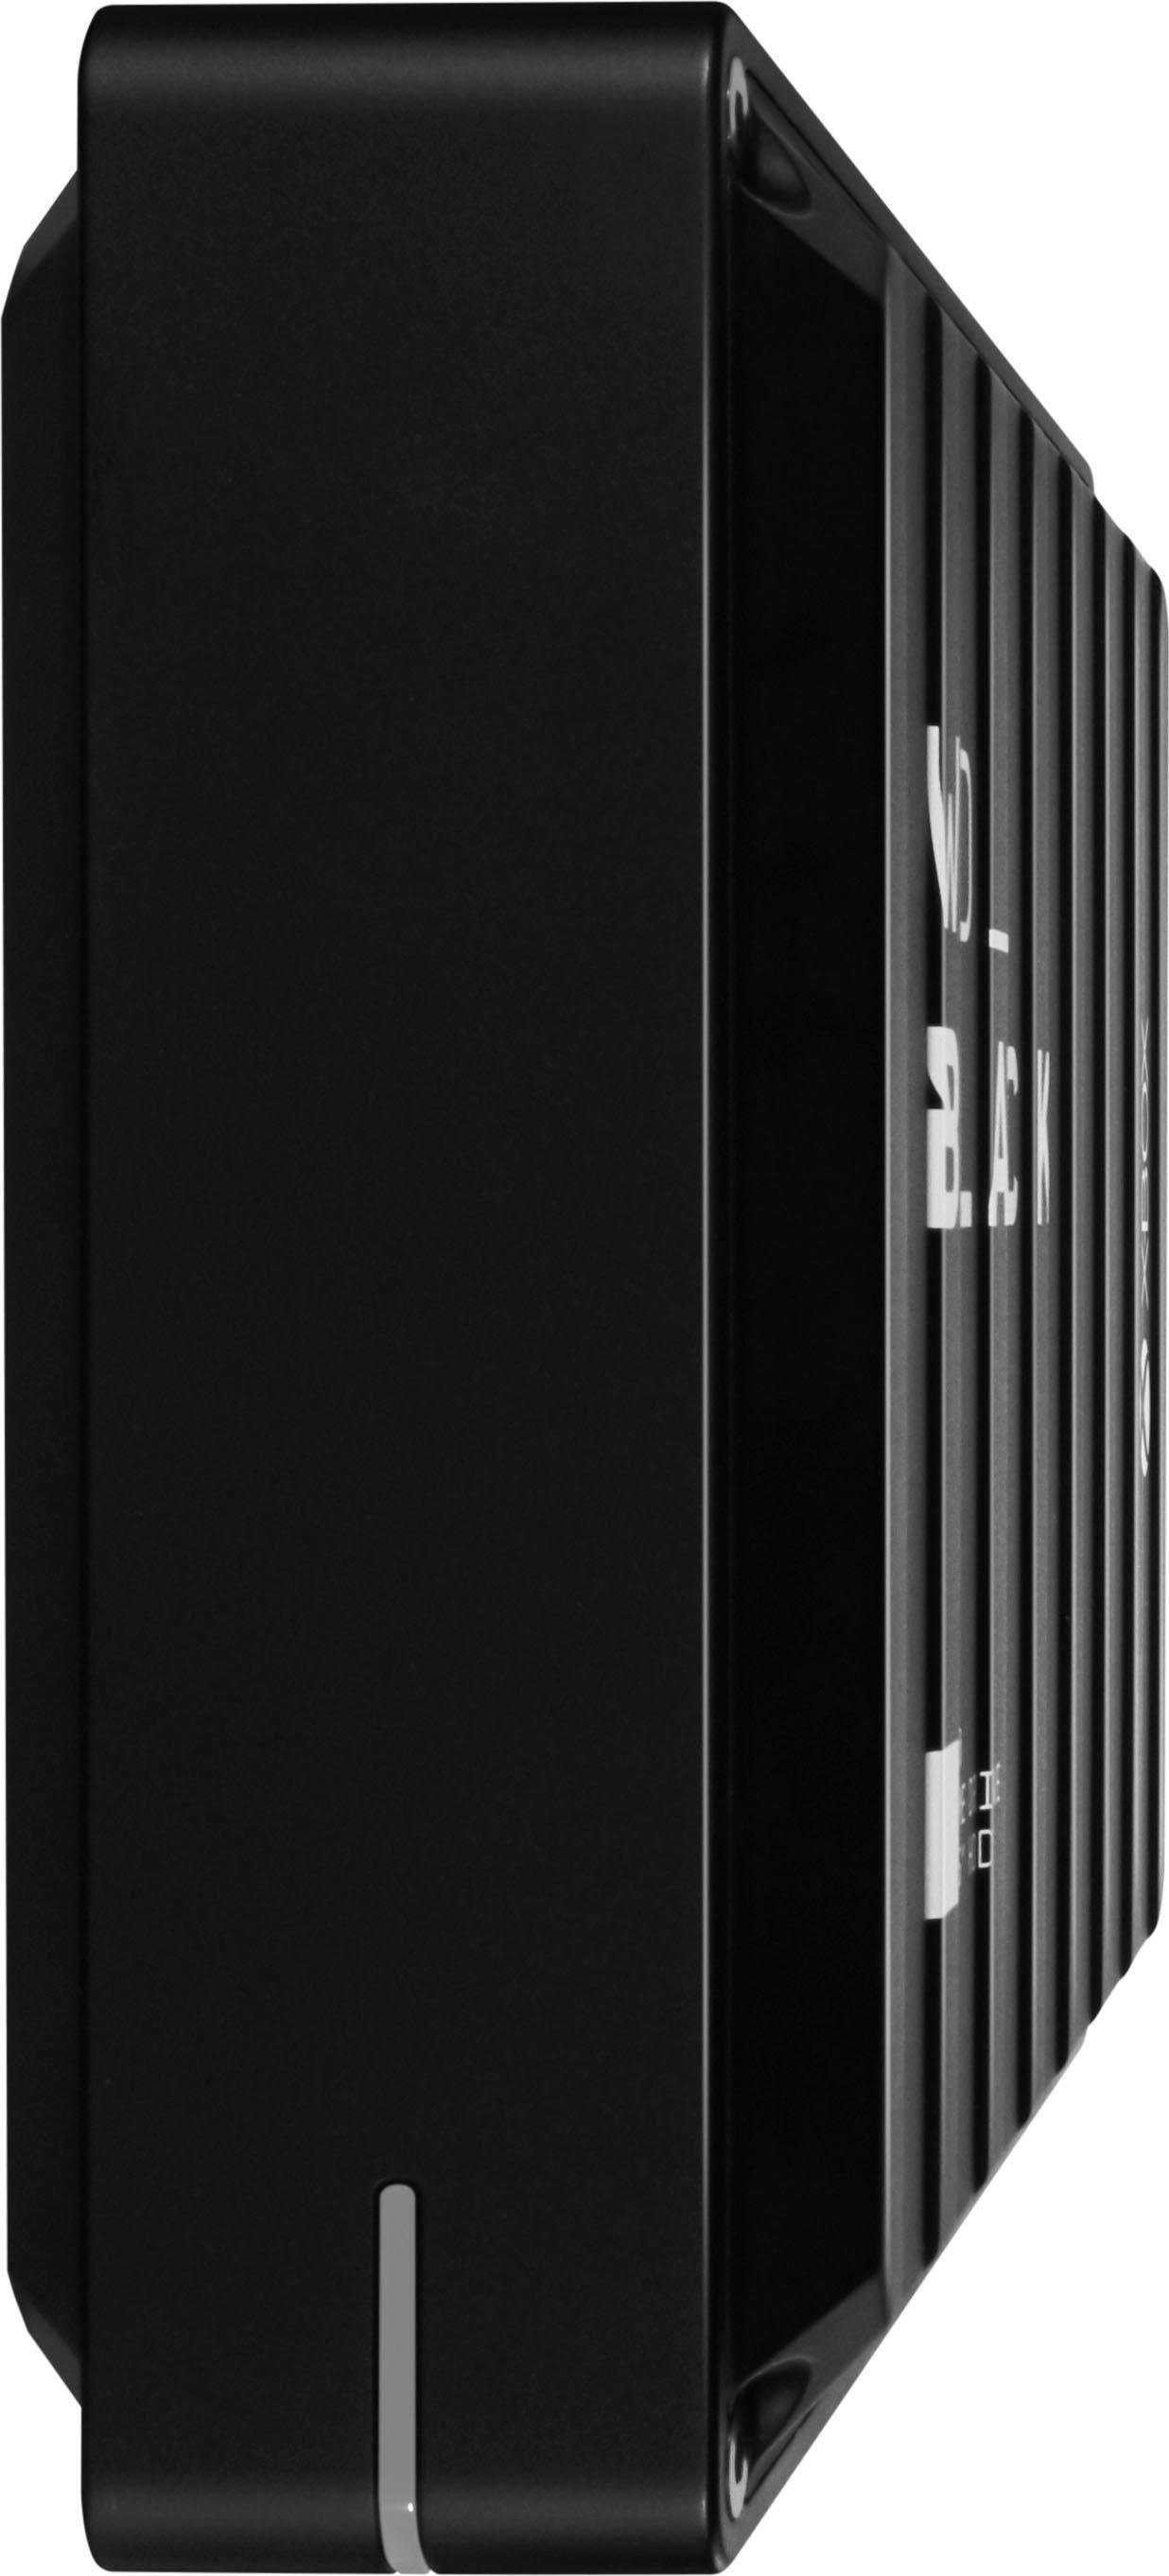 WD_Black externe Gaming-Festplatte »D10 Game Drive XBOX«, 3,5 Zoll, Anschluss USB 3.2